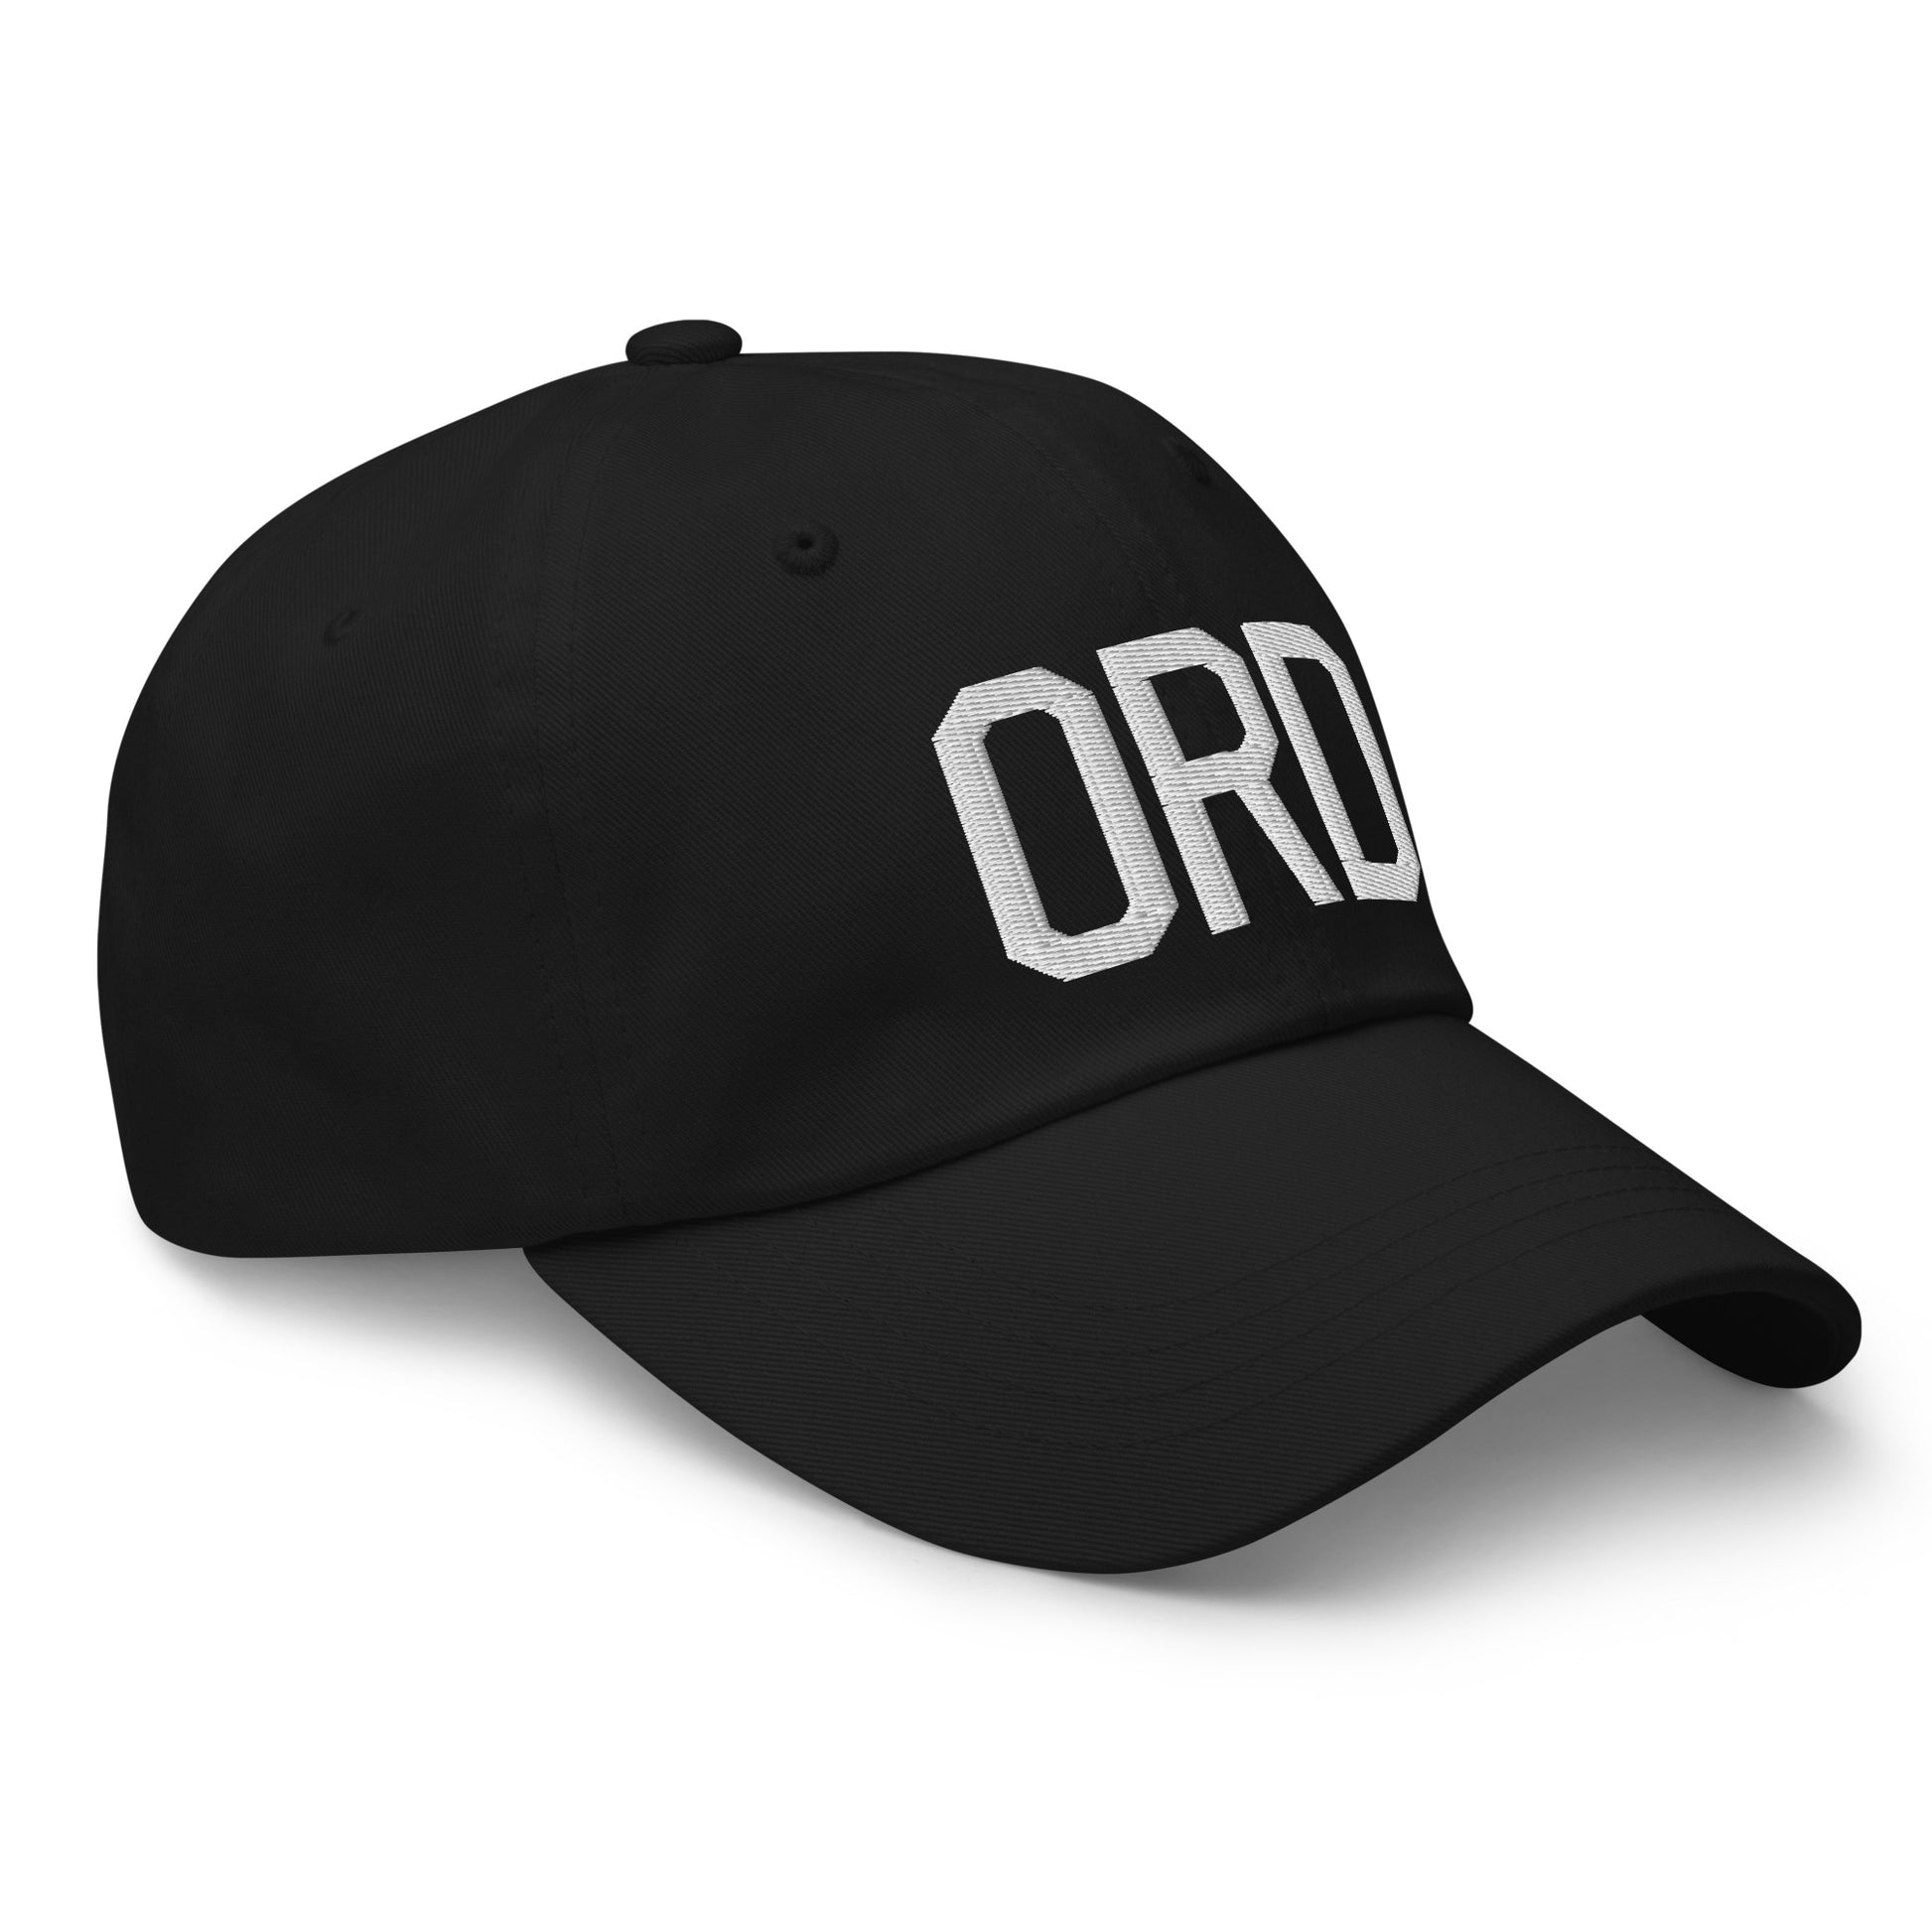 Airport Code Baseball Cap - White • ORD Chicago • YHM Designs - Image 15